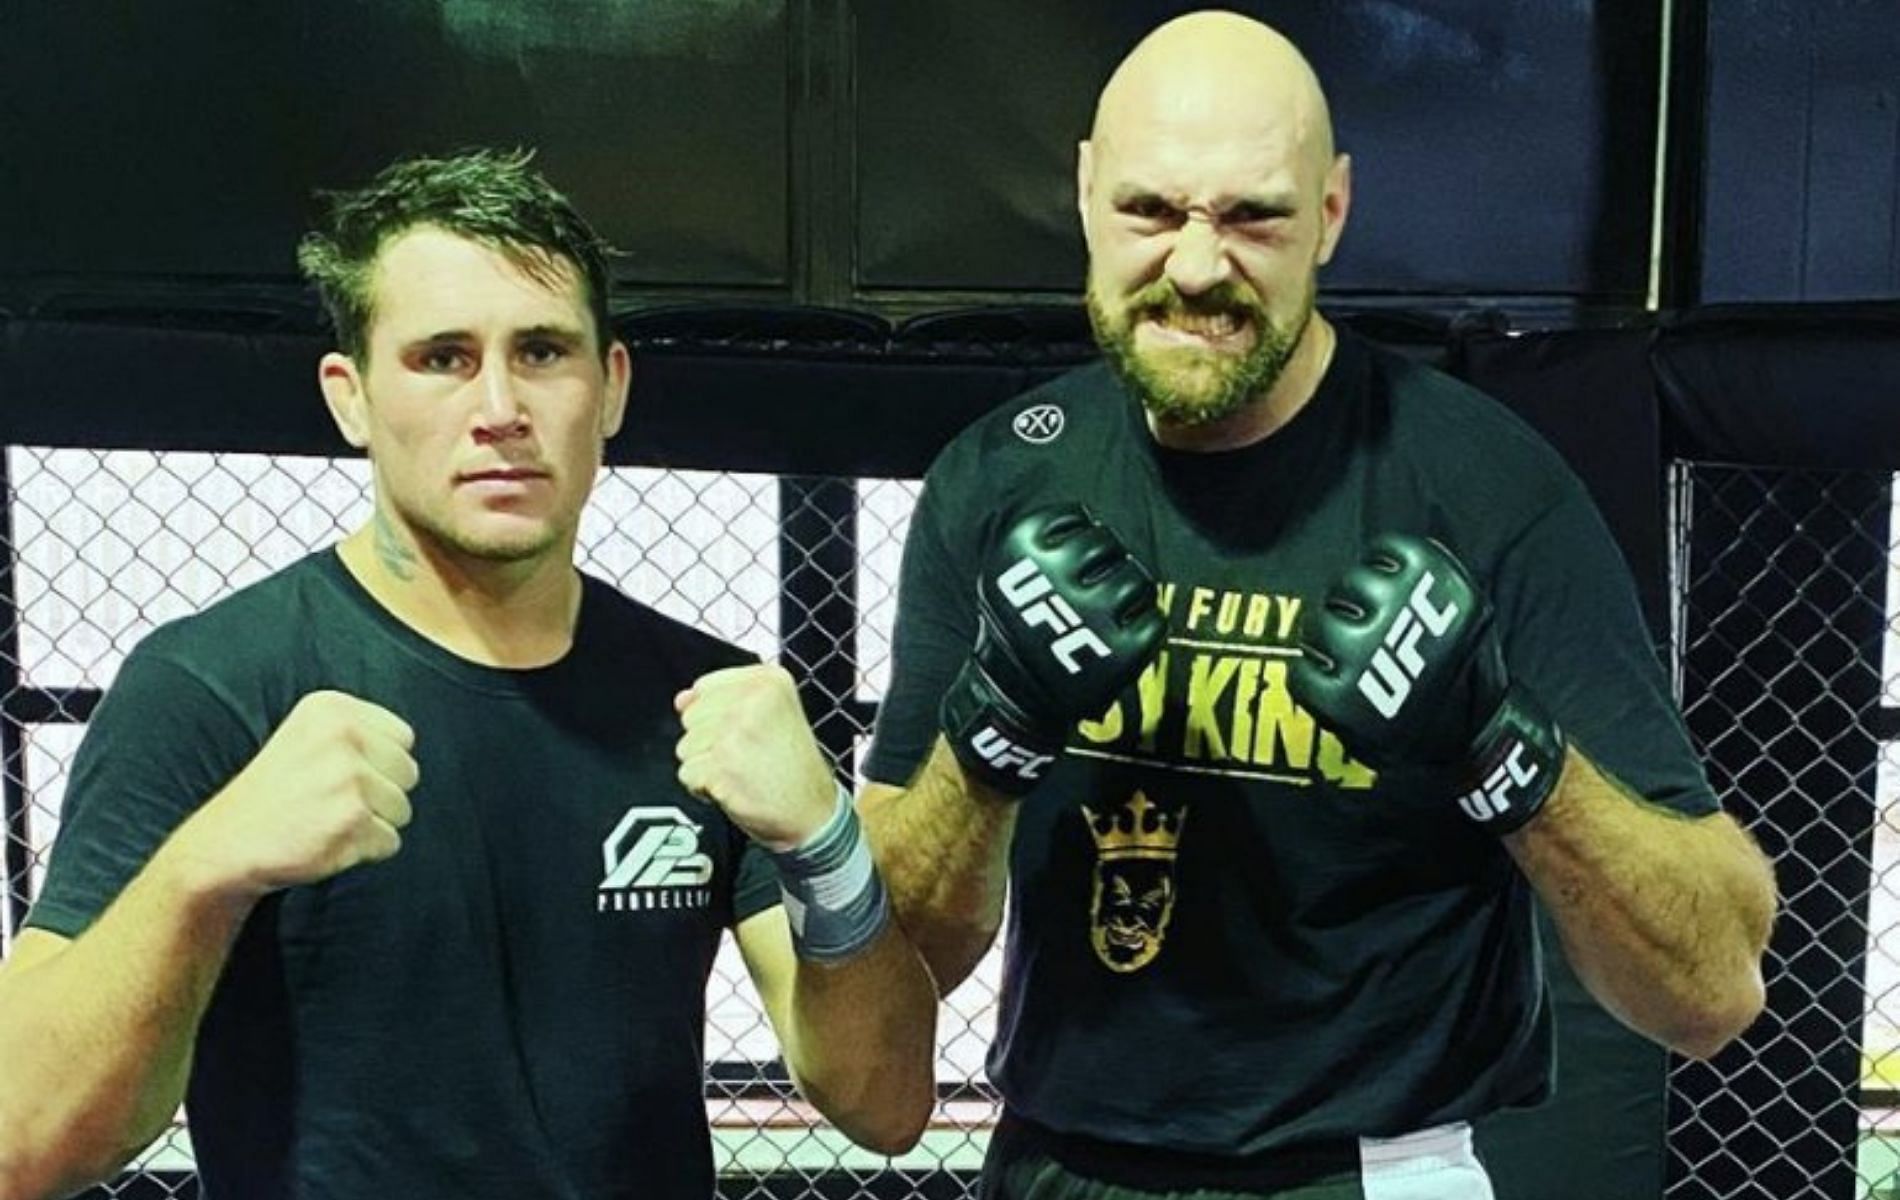 Darren Till (left) &amp; Tyson Fury (right) [Image Credits- @TheMacLife on Twitter]